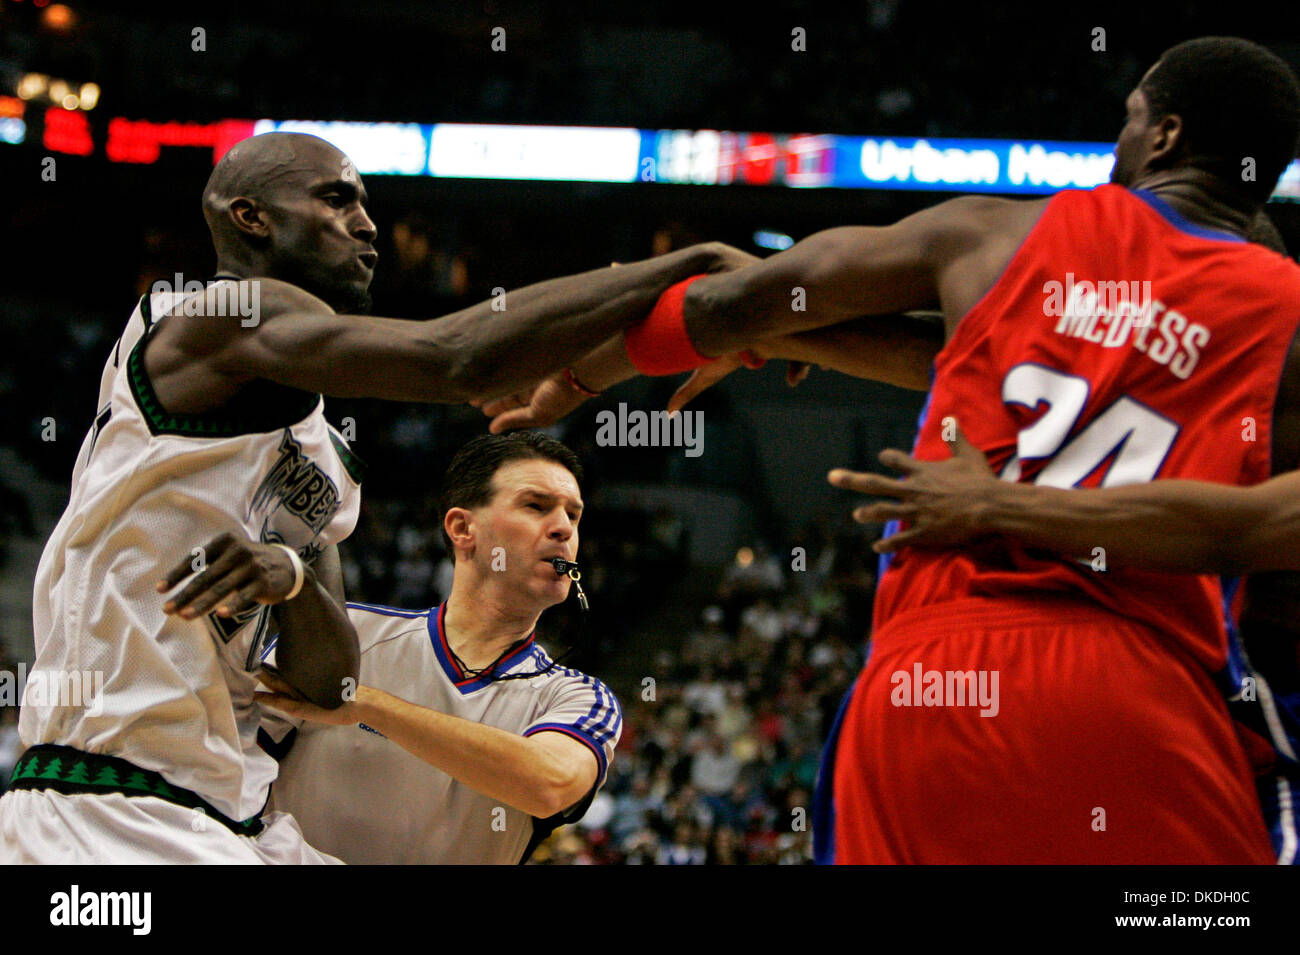 Jan 21, 2007 - Minneapolis, MN, USA - KEVIN GARNETT throws a punch at ANTONIO MCDYESS of the Detroit Pistons in the fourth quarter of the Wolves 104-98 double overtime loss to Detroit at the Target Center. Garnett has been suspended for one game for throwing the punch. Stock Photo